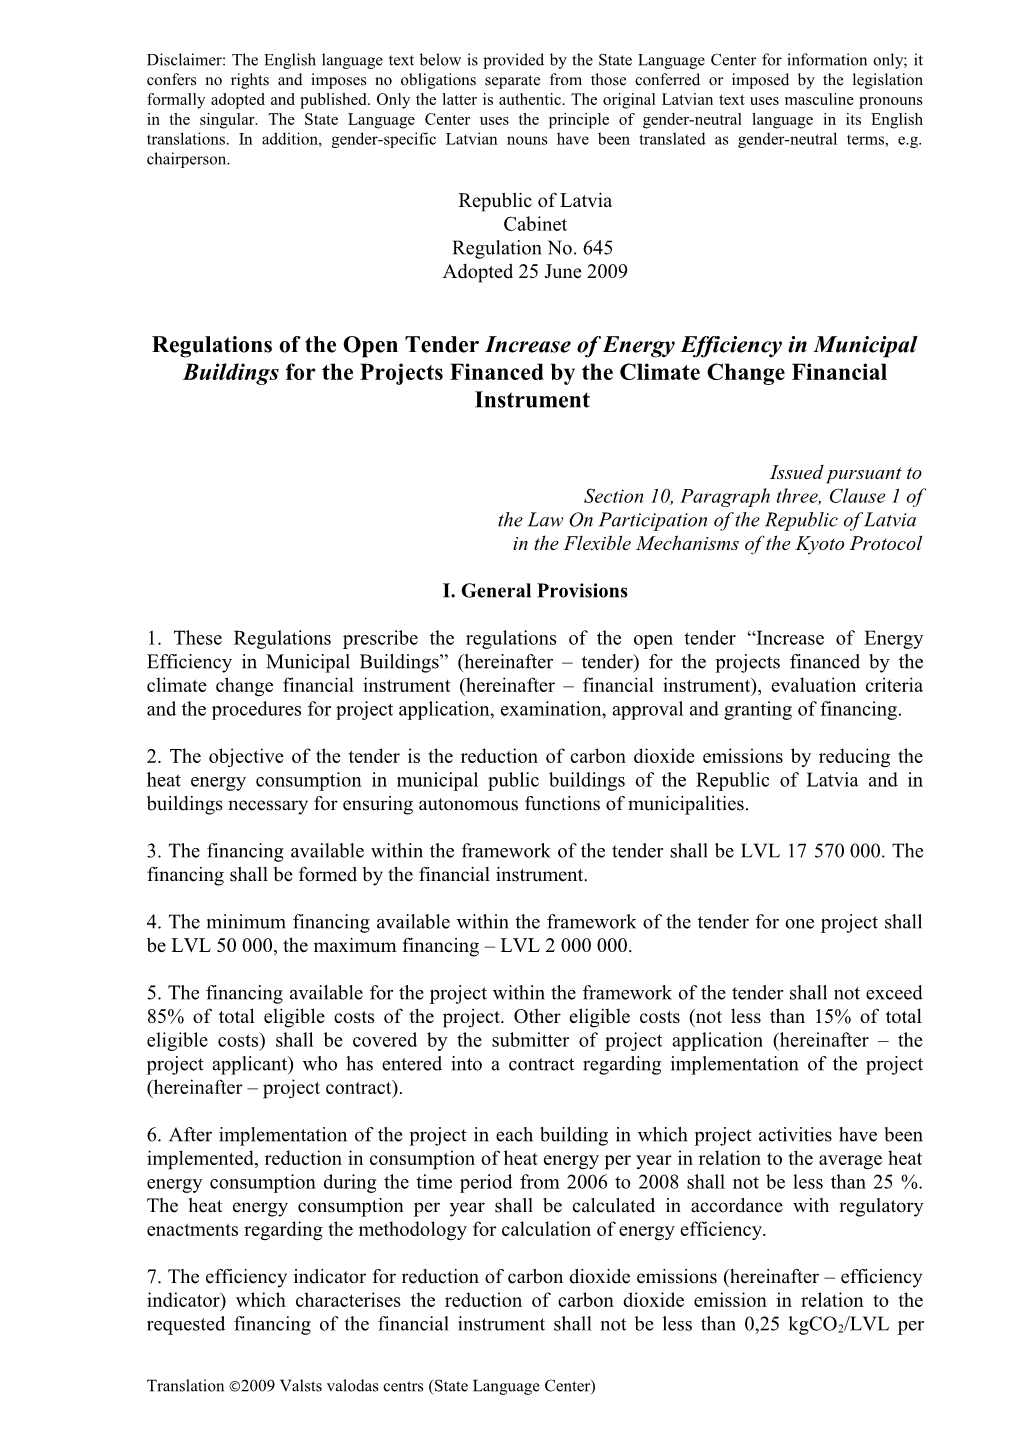 Regulations of the Open Tender Increase of Energy Efficiency in Municipal Buildings For